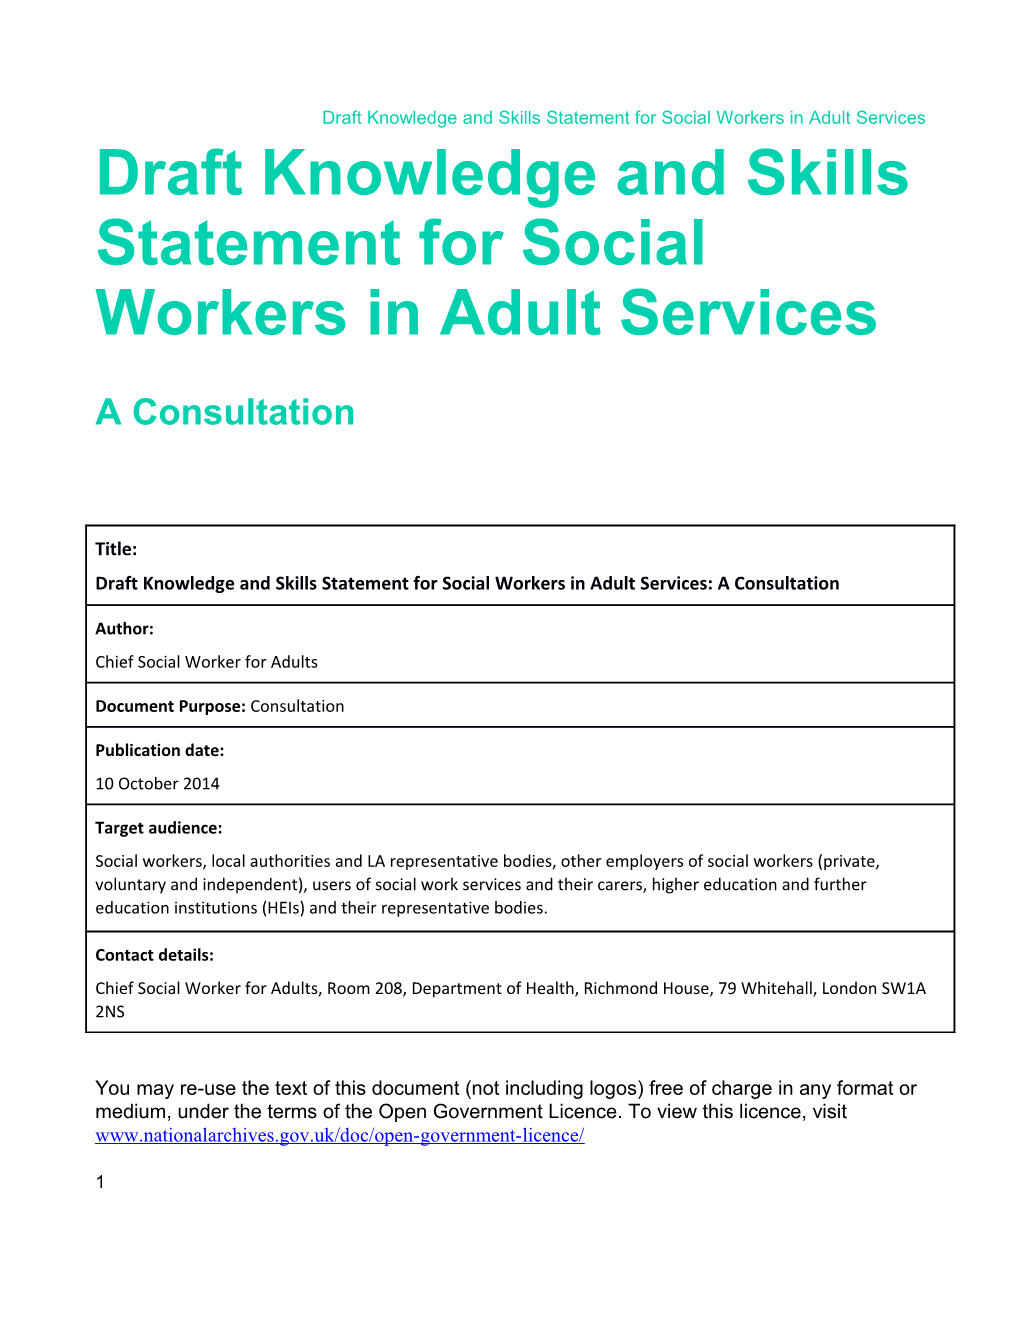 Draft Knowledge and Skills Statement for Social Workers in Adult Services